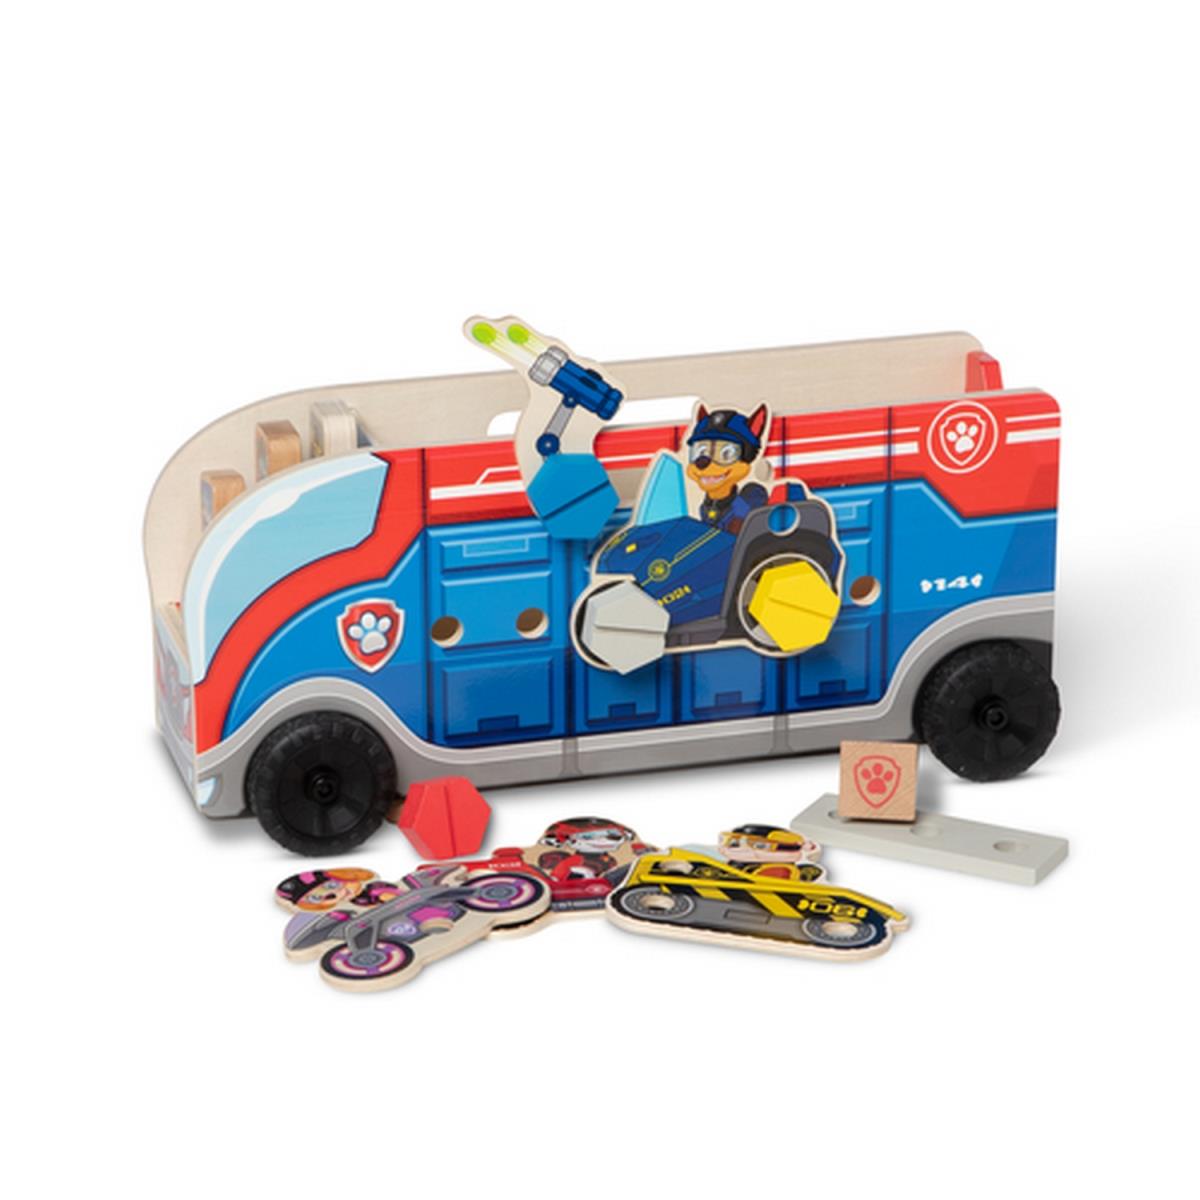 Picture of Melissa & Doug 33333 Paw Patrol 2 Match & Build Mission Cruiser